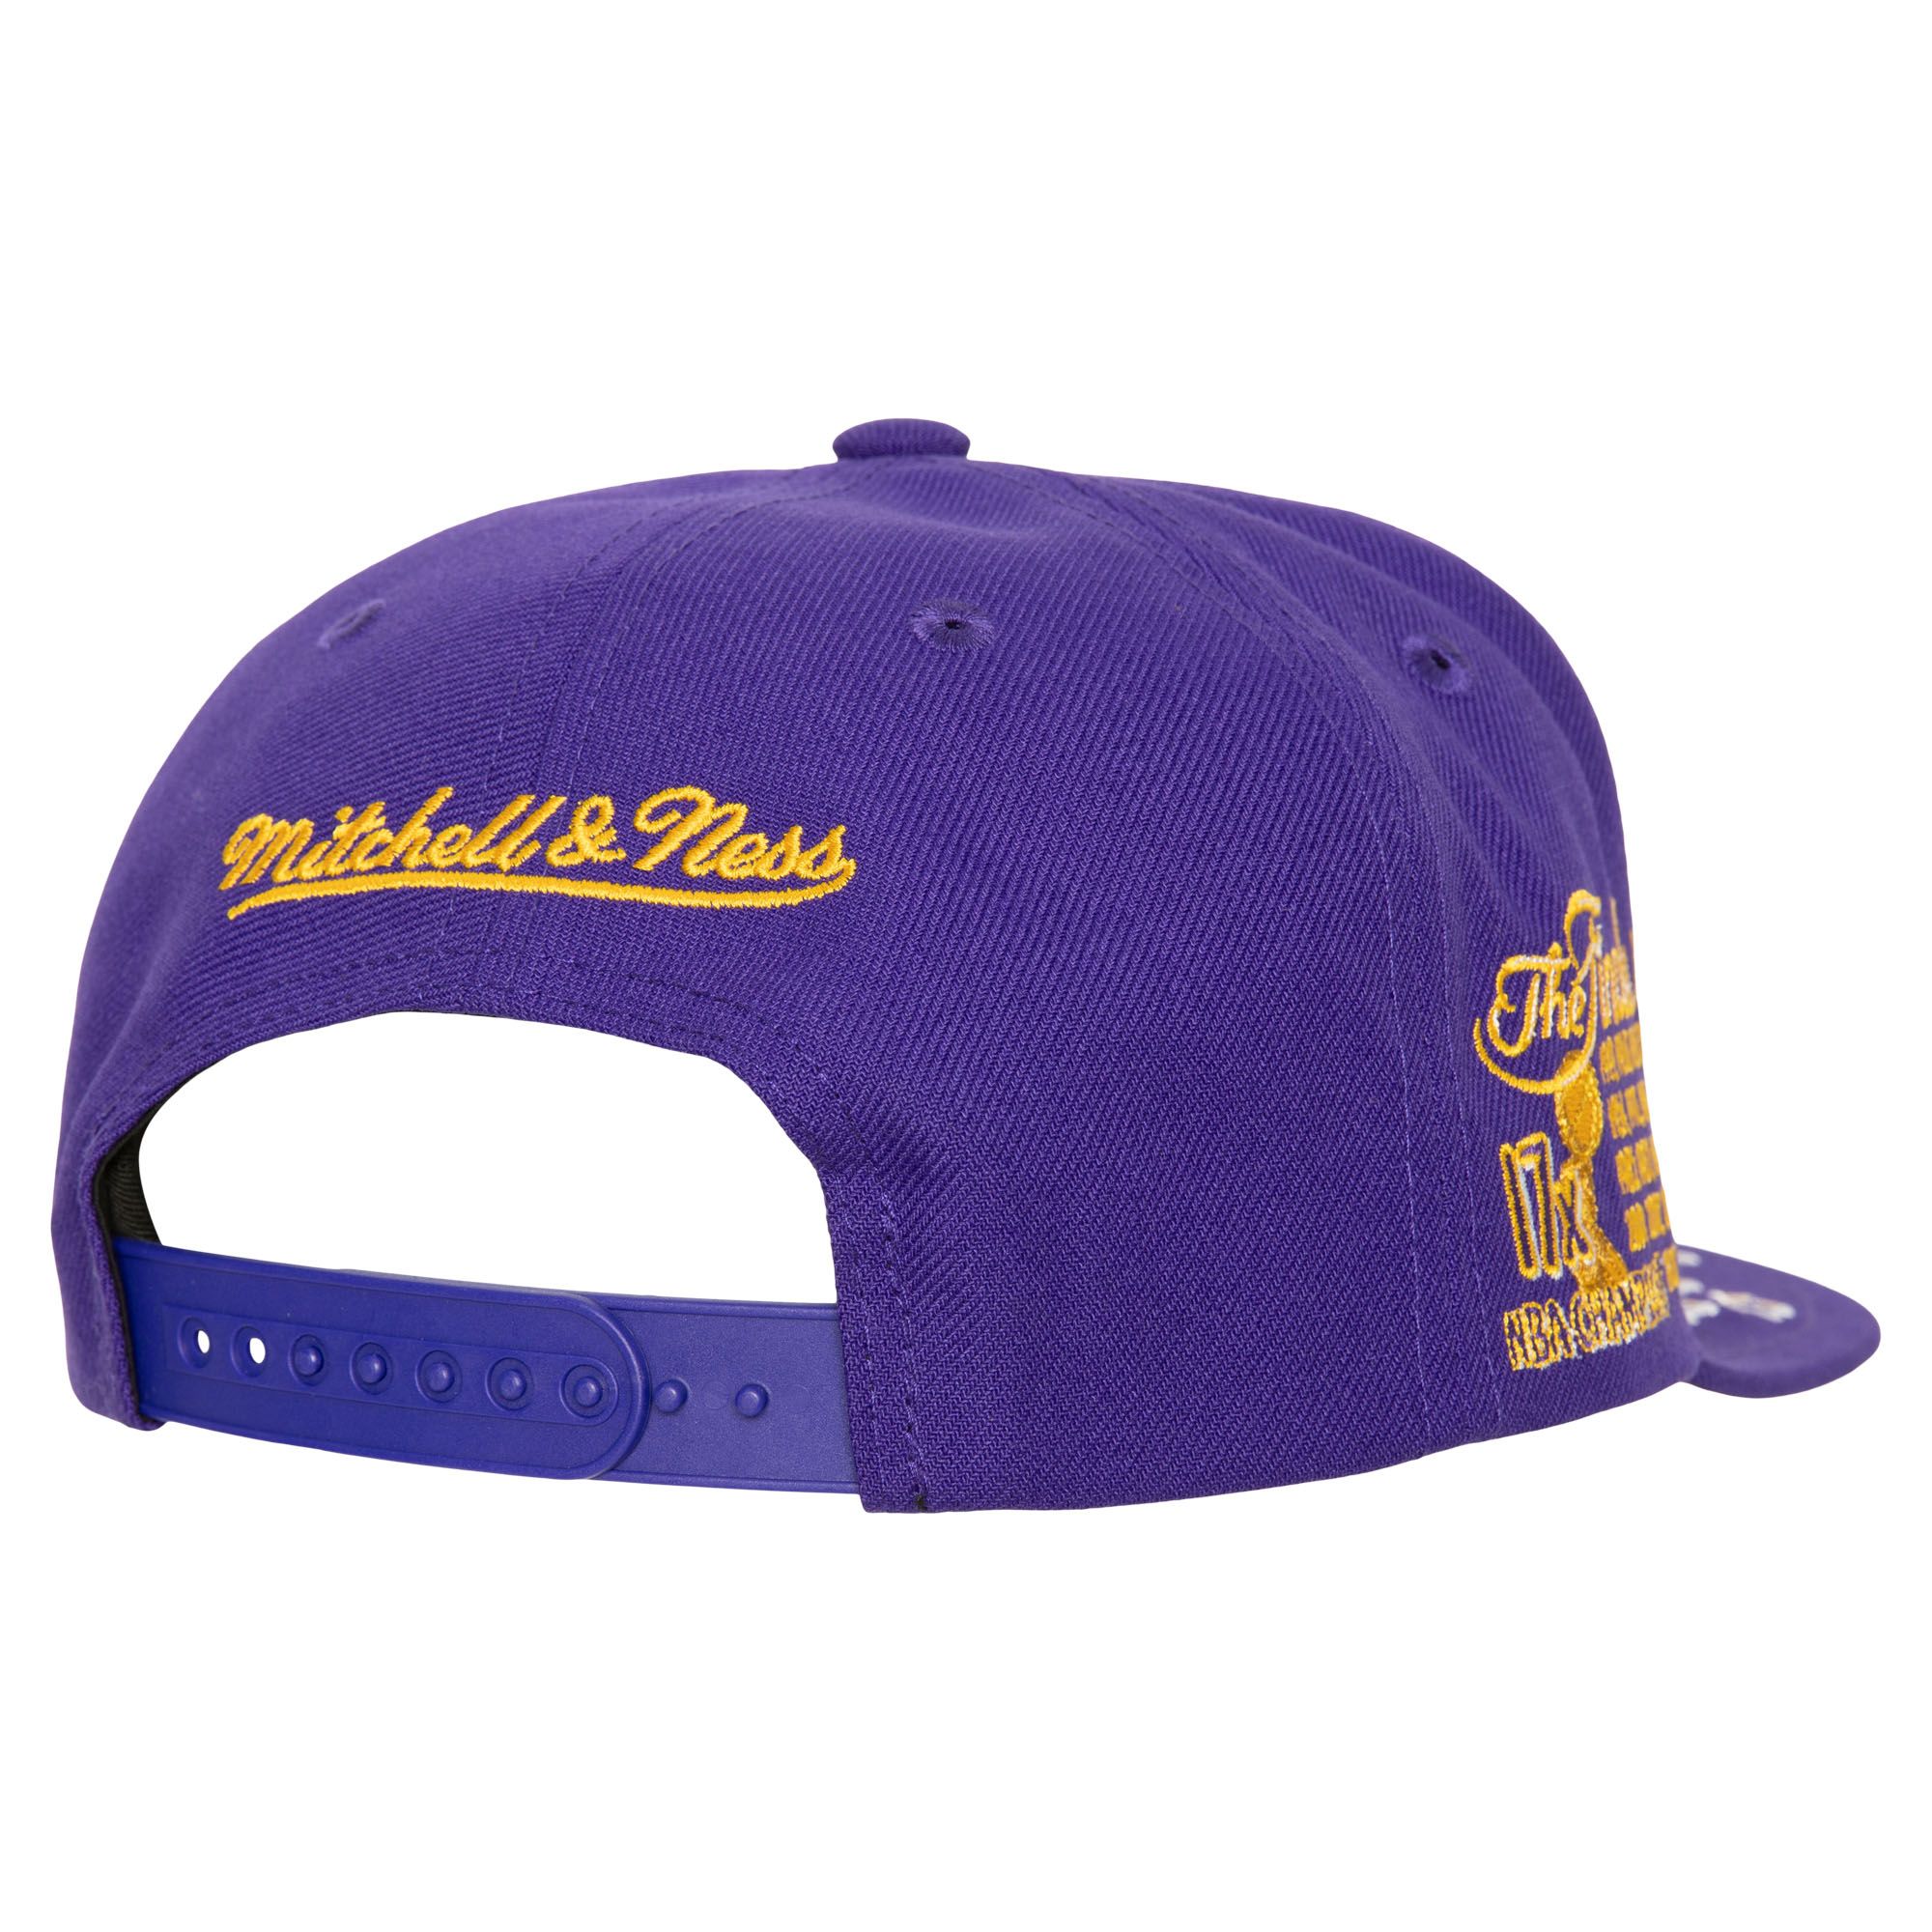 All Out Snapback